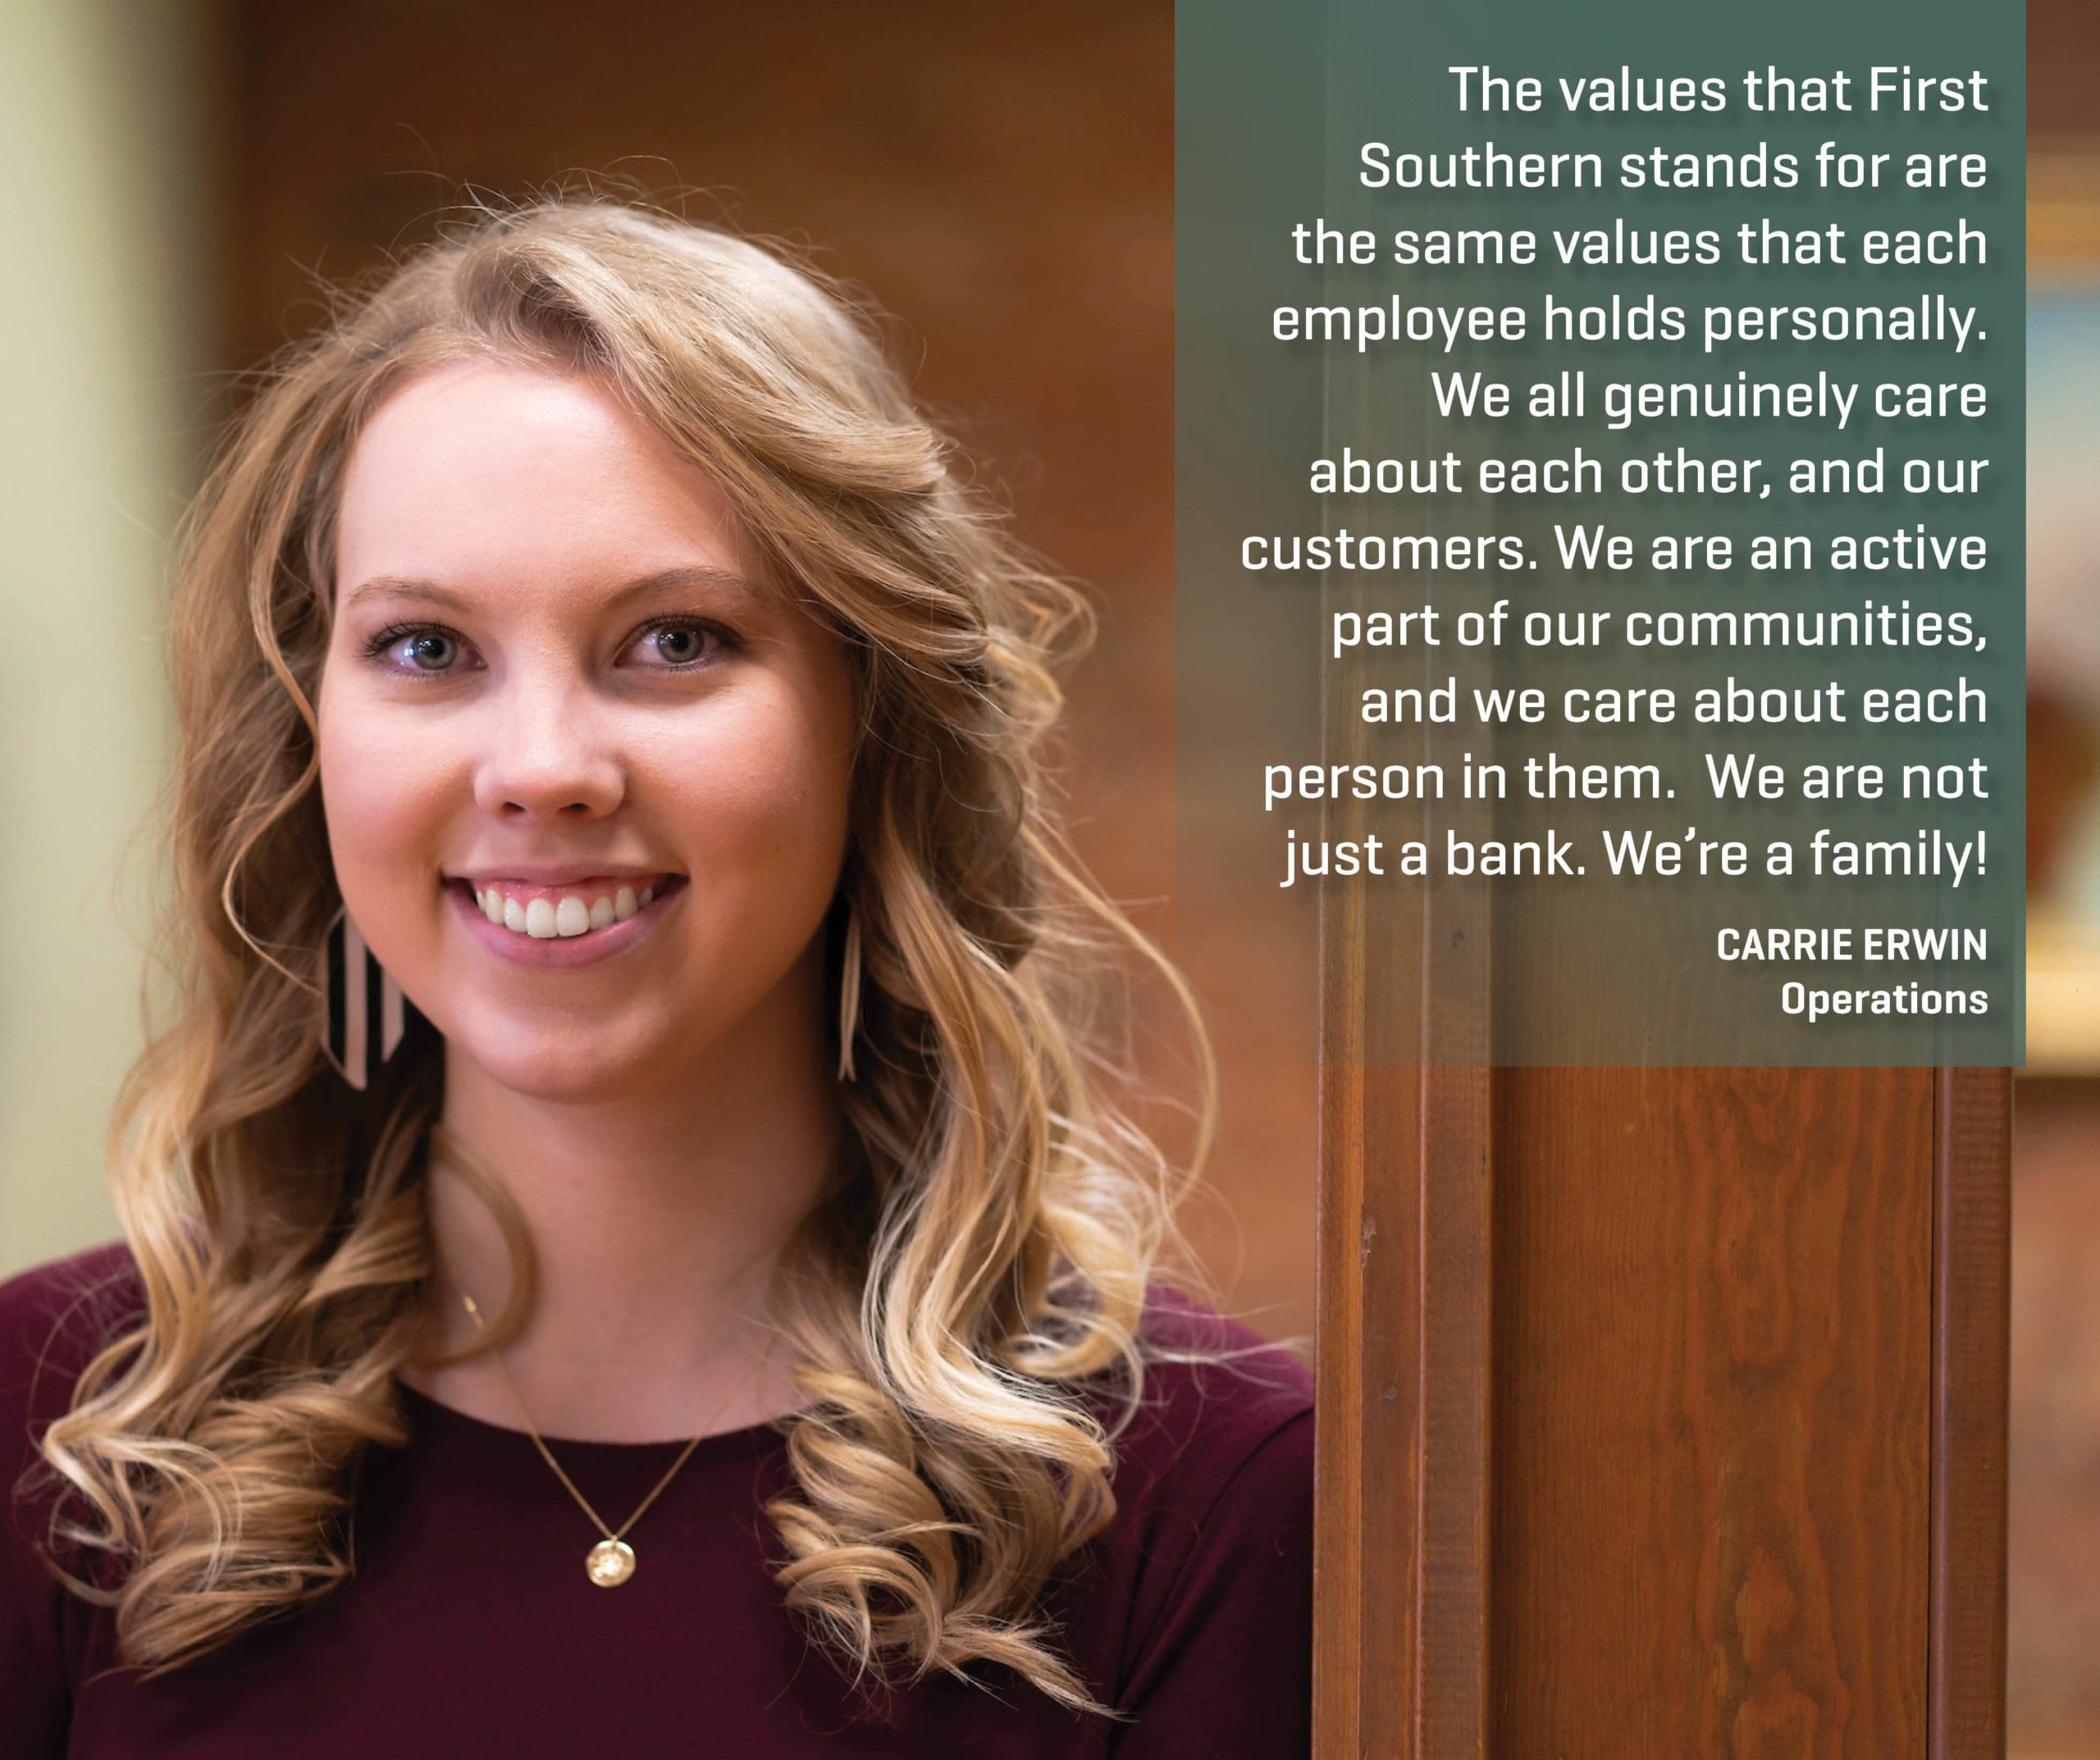 Carrie Erwin employee gives quote about working as a team member